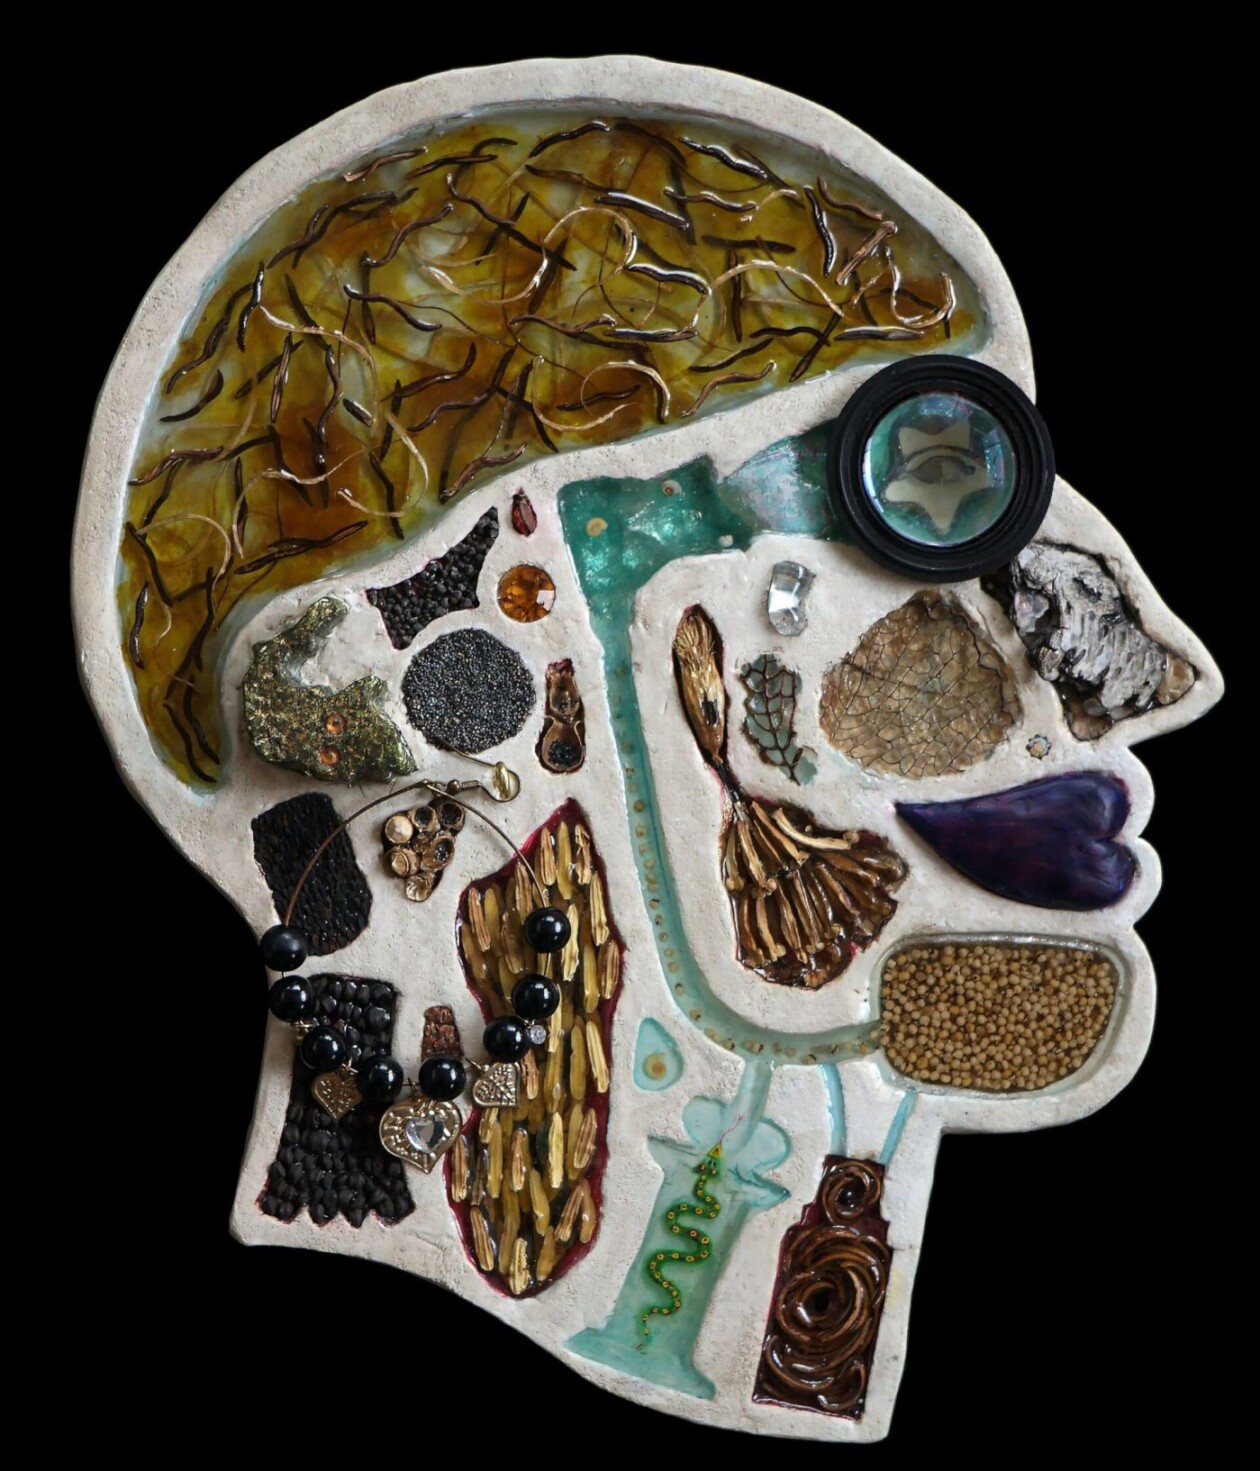 Assemblage Sculptures Of Anatomical Human Head Cross Sections By Edwige Massart And Xavier Wynn (17)